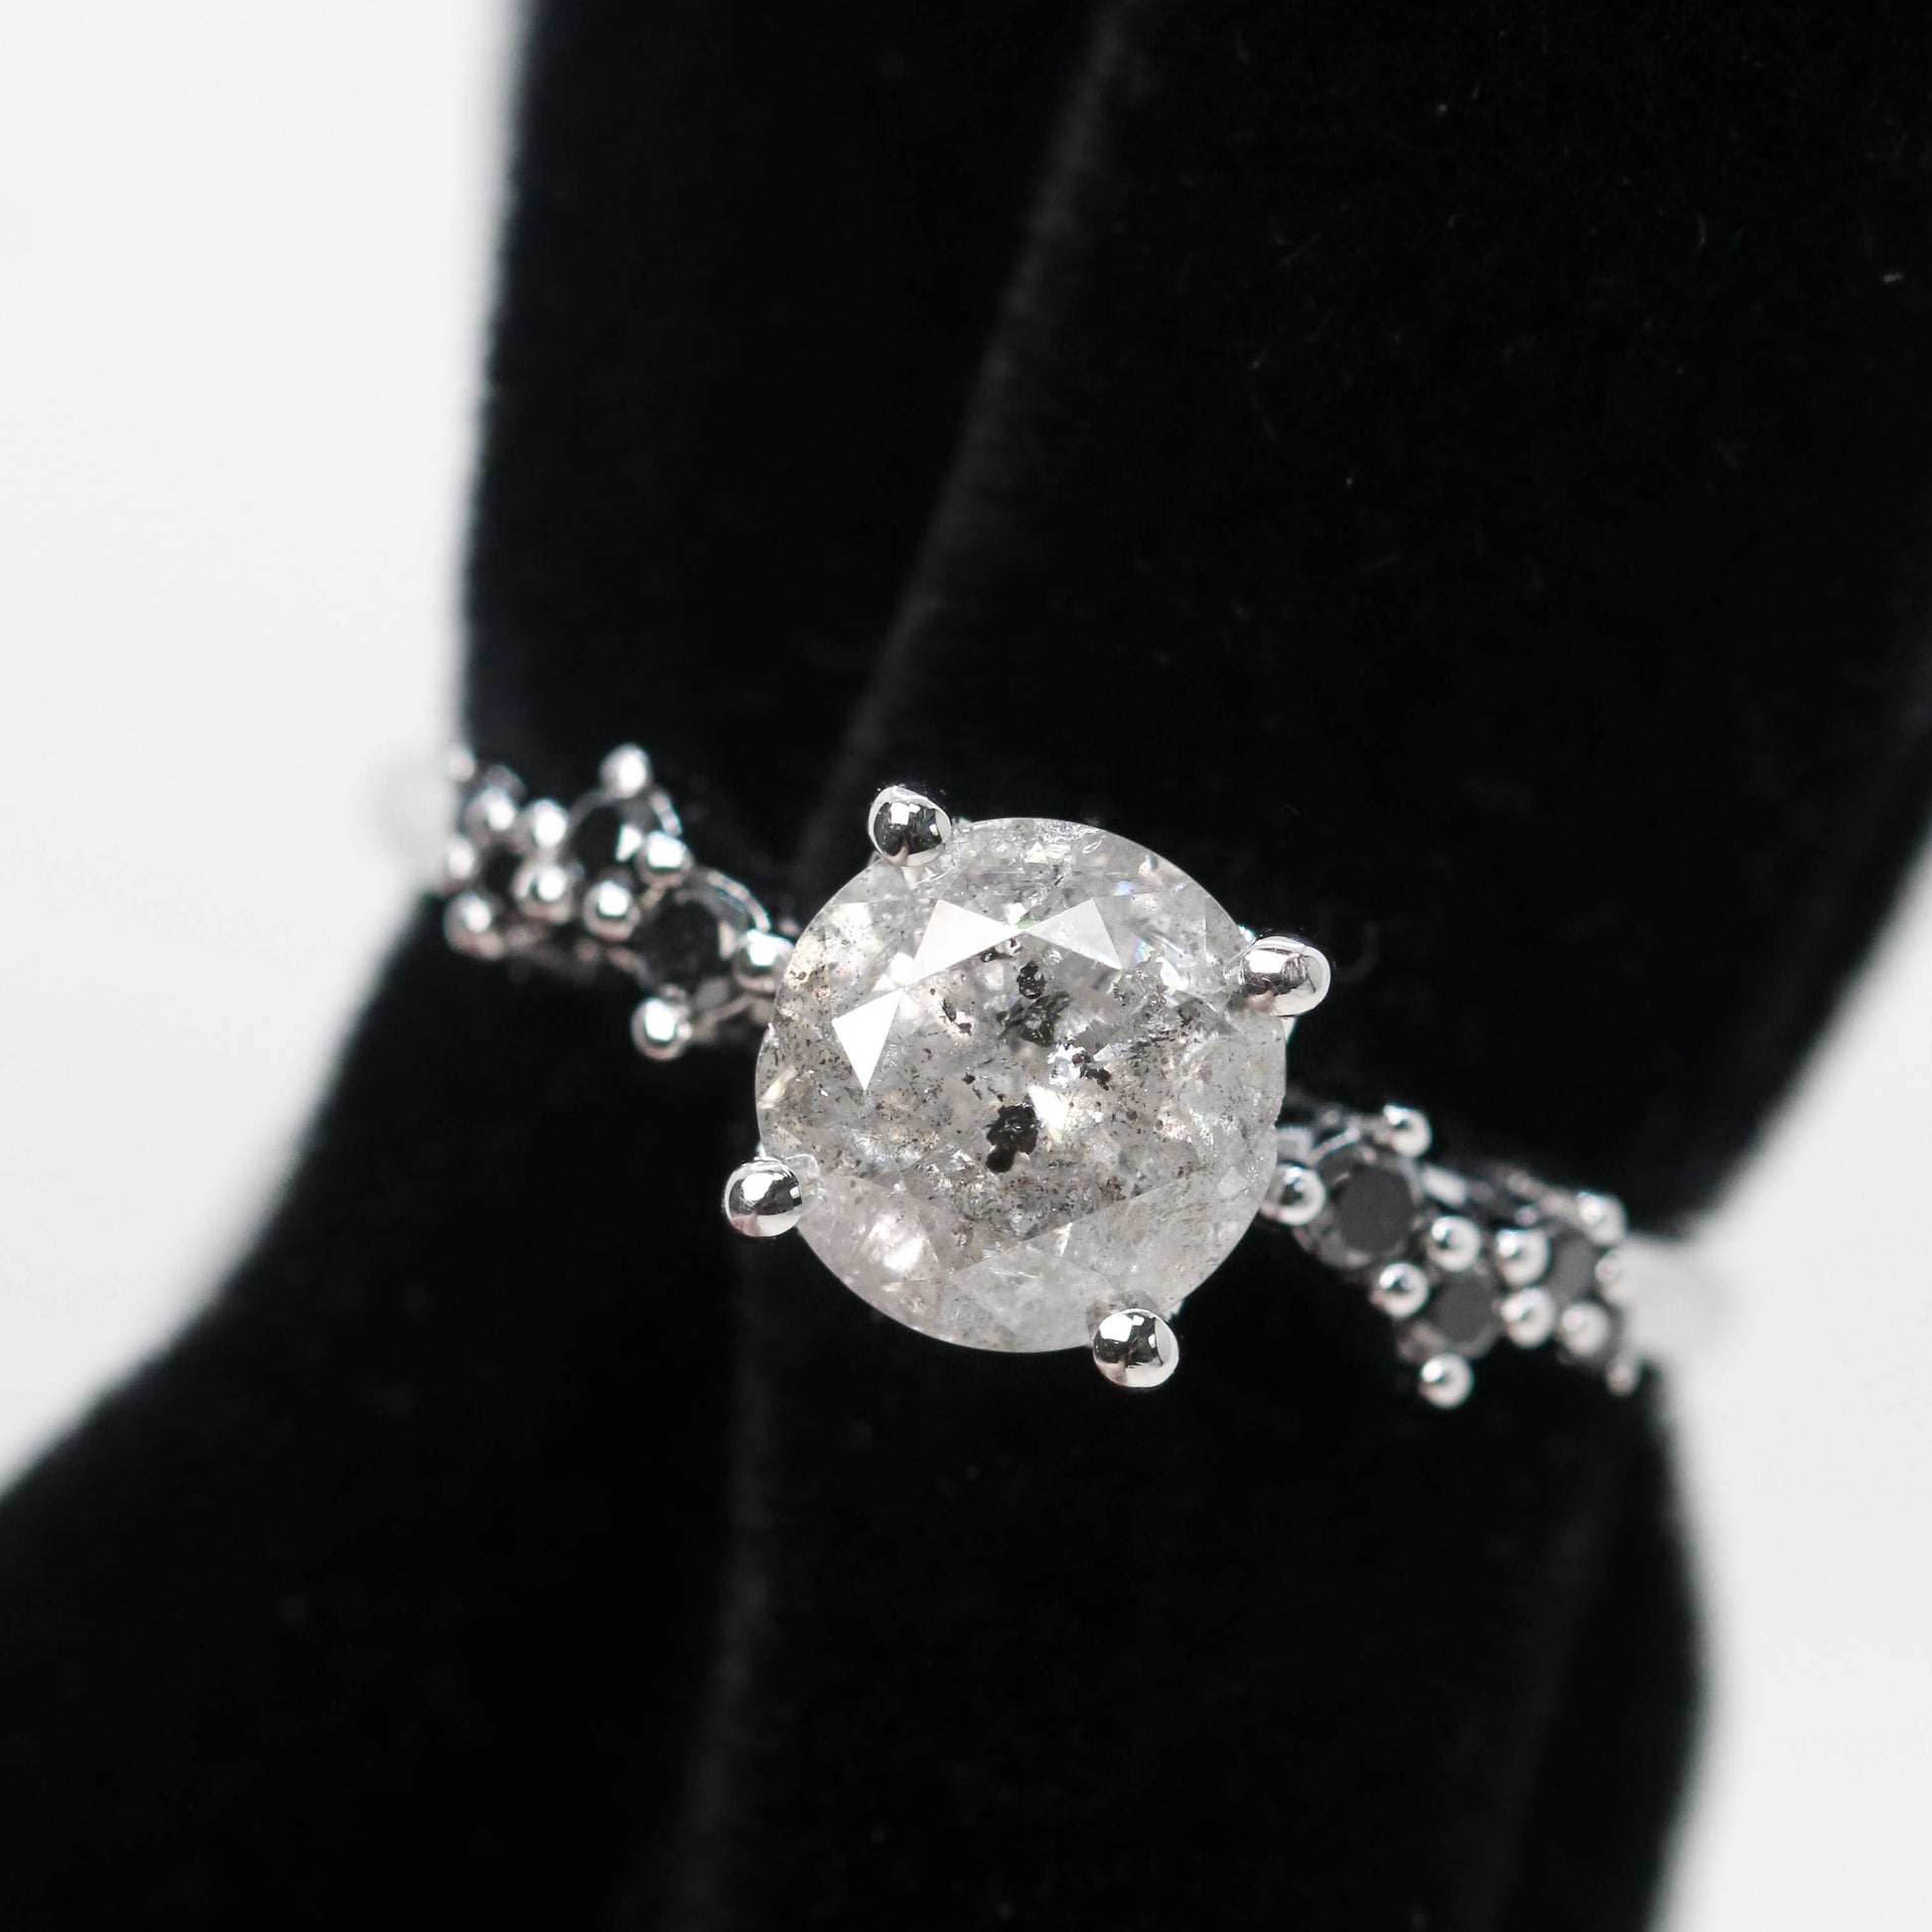 Zealan Ring with a 1.48 Carat Gray Celestial Round Diamond and Black Accent Diamonds in 14k White Gold - Ready to Size and Ship - Midwinter Co. Alternative Bridal Rings and Modern Fine Jewelry